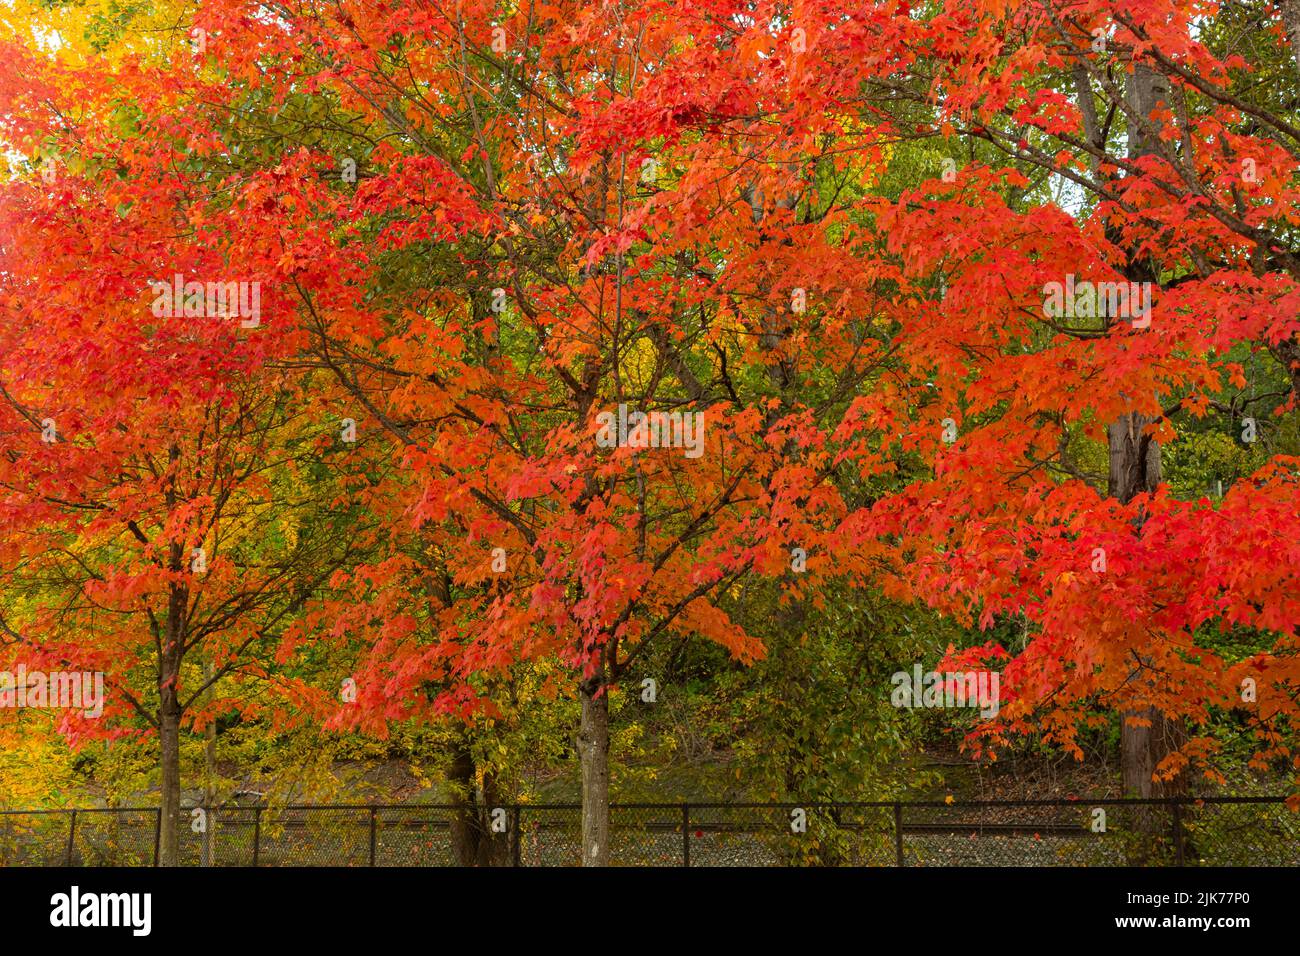 WA21793-00...WASHINGTON - Colorful canopy created by trees in fall color along the main road into Gene Coulon Memorial Beach Park in Renton. Stock Photo